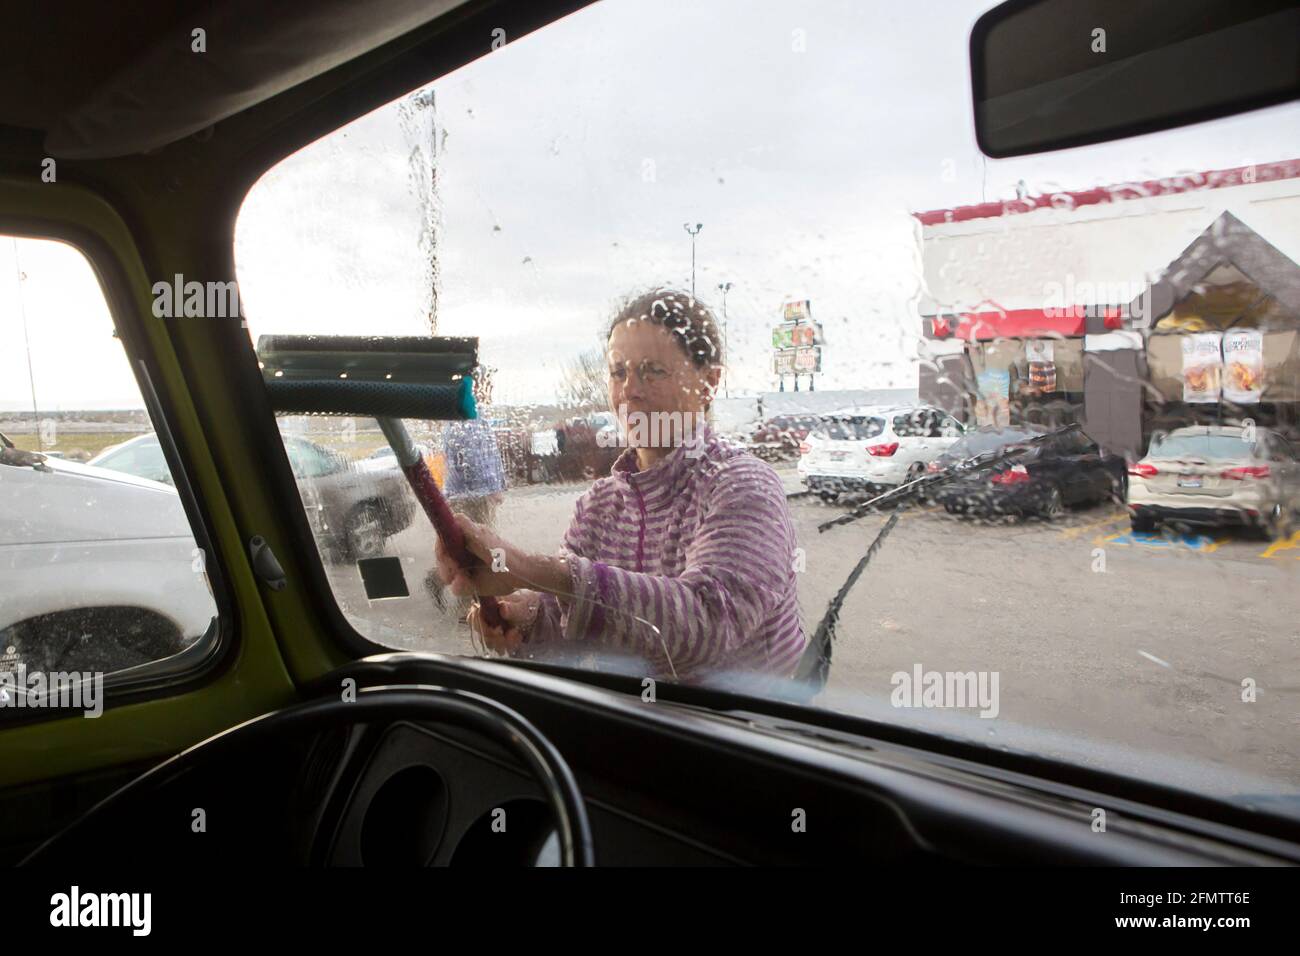 A woman cleans the windshield of VW camper van during roadtrip Stock Photo